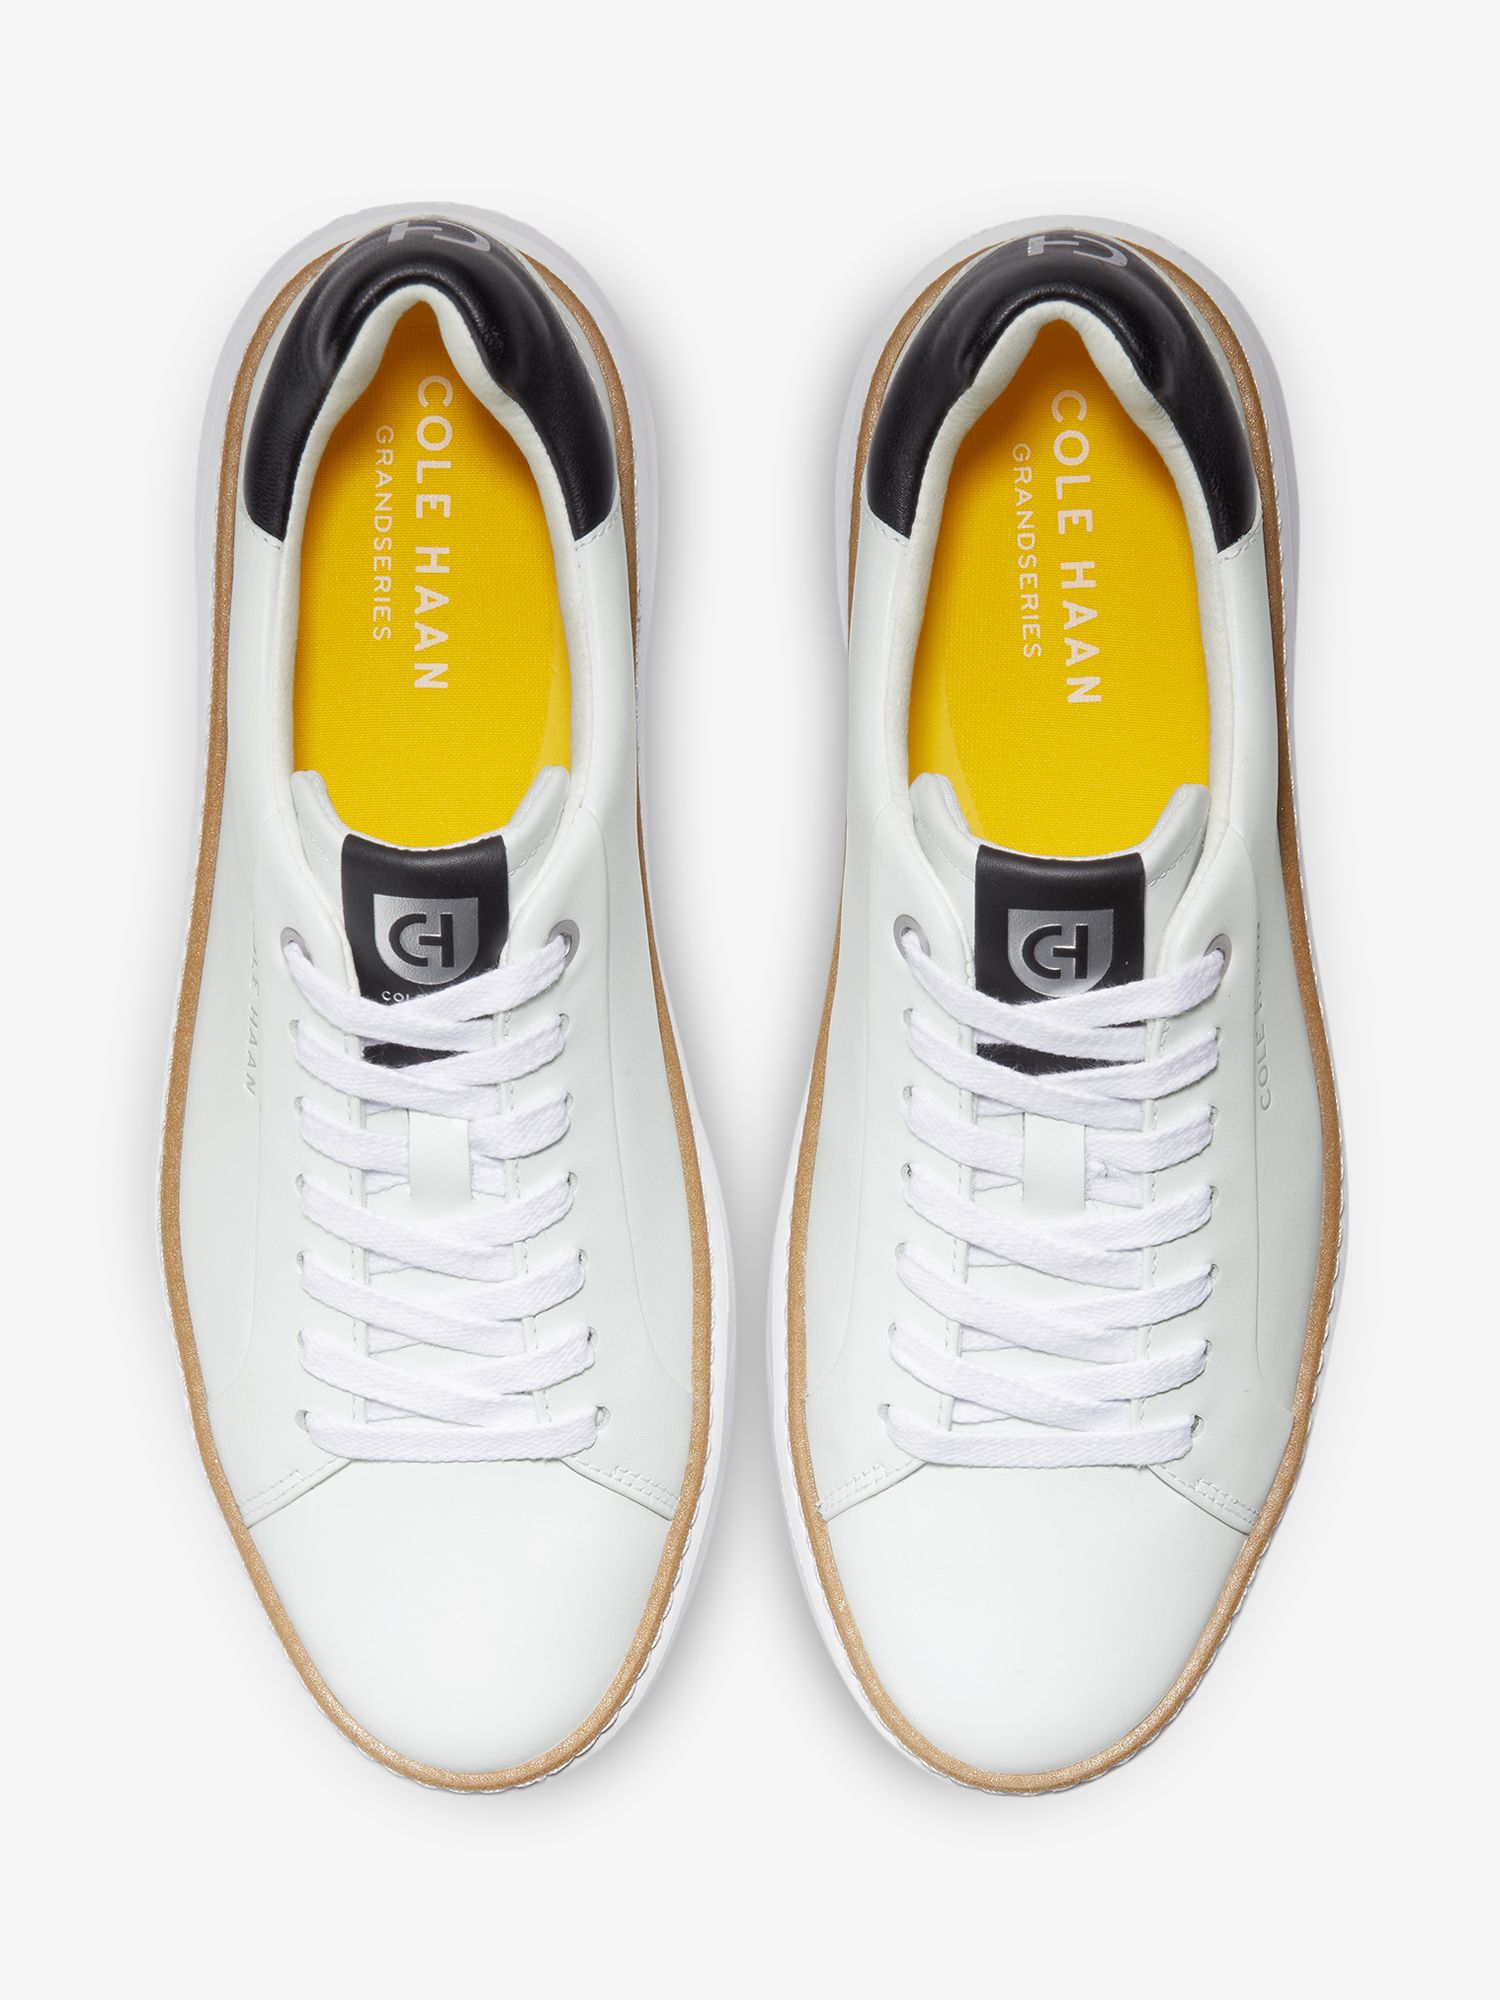 Cole Haan Top Spin Low Top Leather Trainers, White/Multi at John Lewis ...